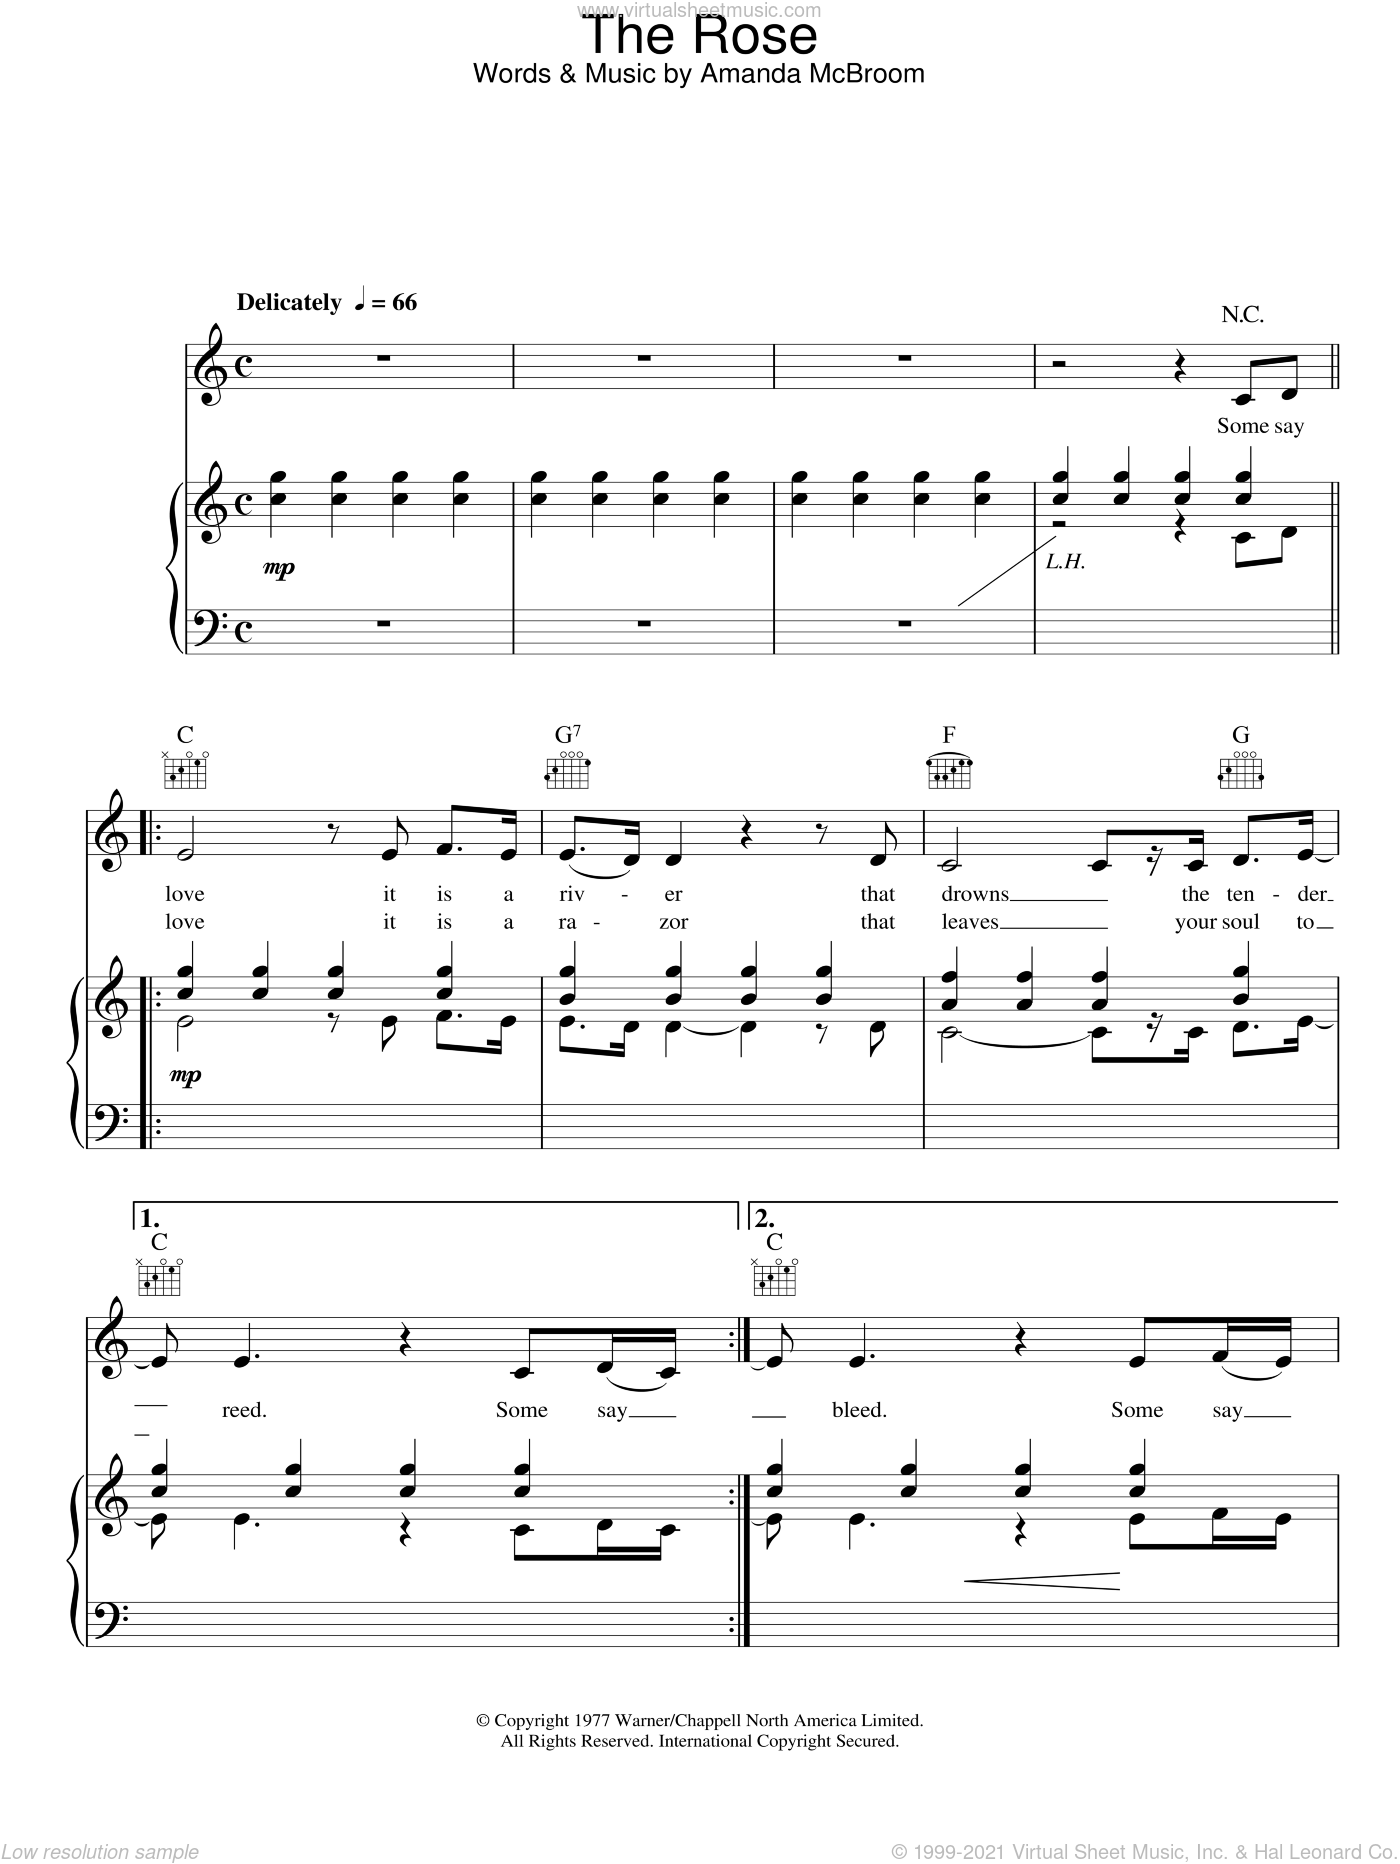 Midler - The Rose sheet music for voice, piano or guitar [PDF]